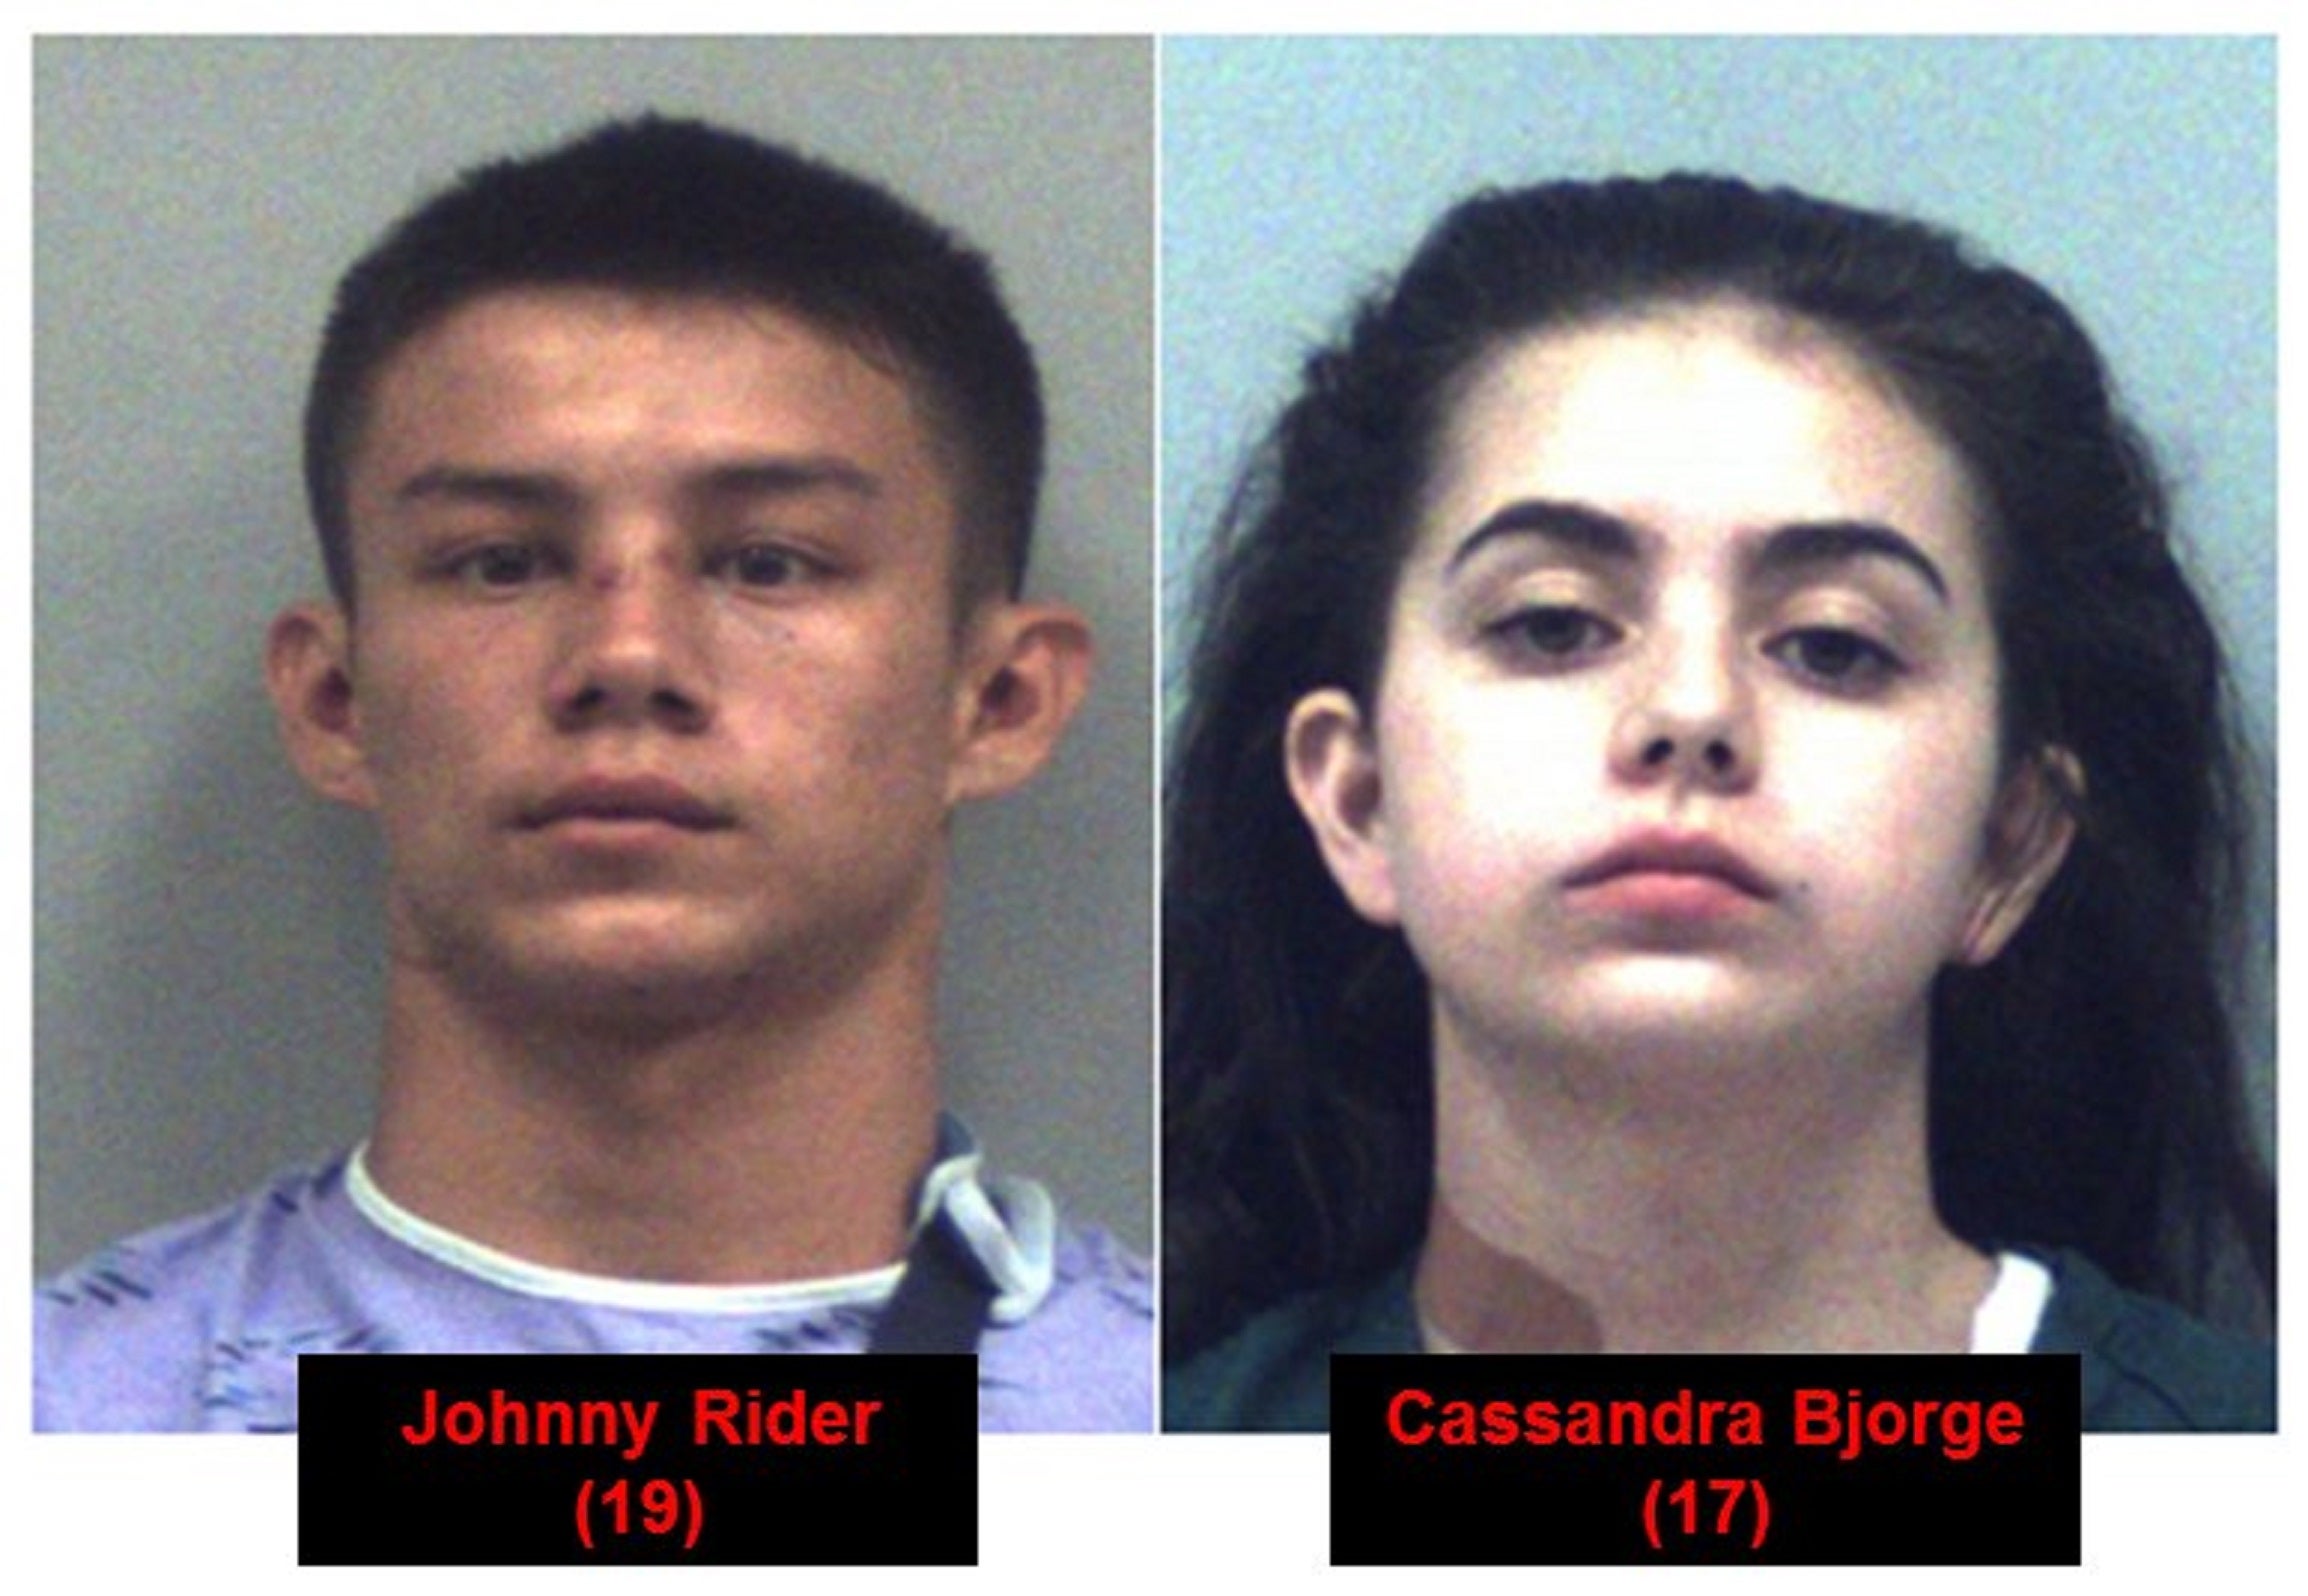 Johnny Rider and Cassandra Bjorge are charged with murder and aggravated assault for the death of 63-year-old Wendy and Randall Bjorge